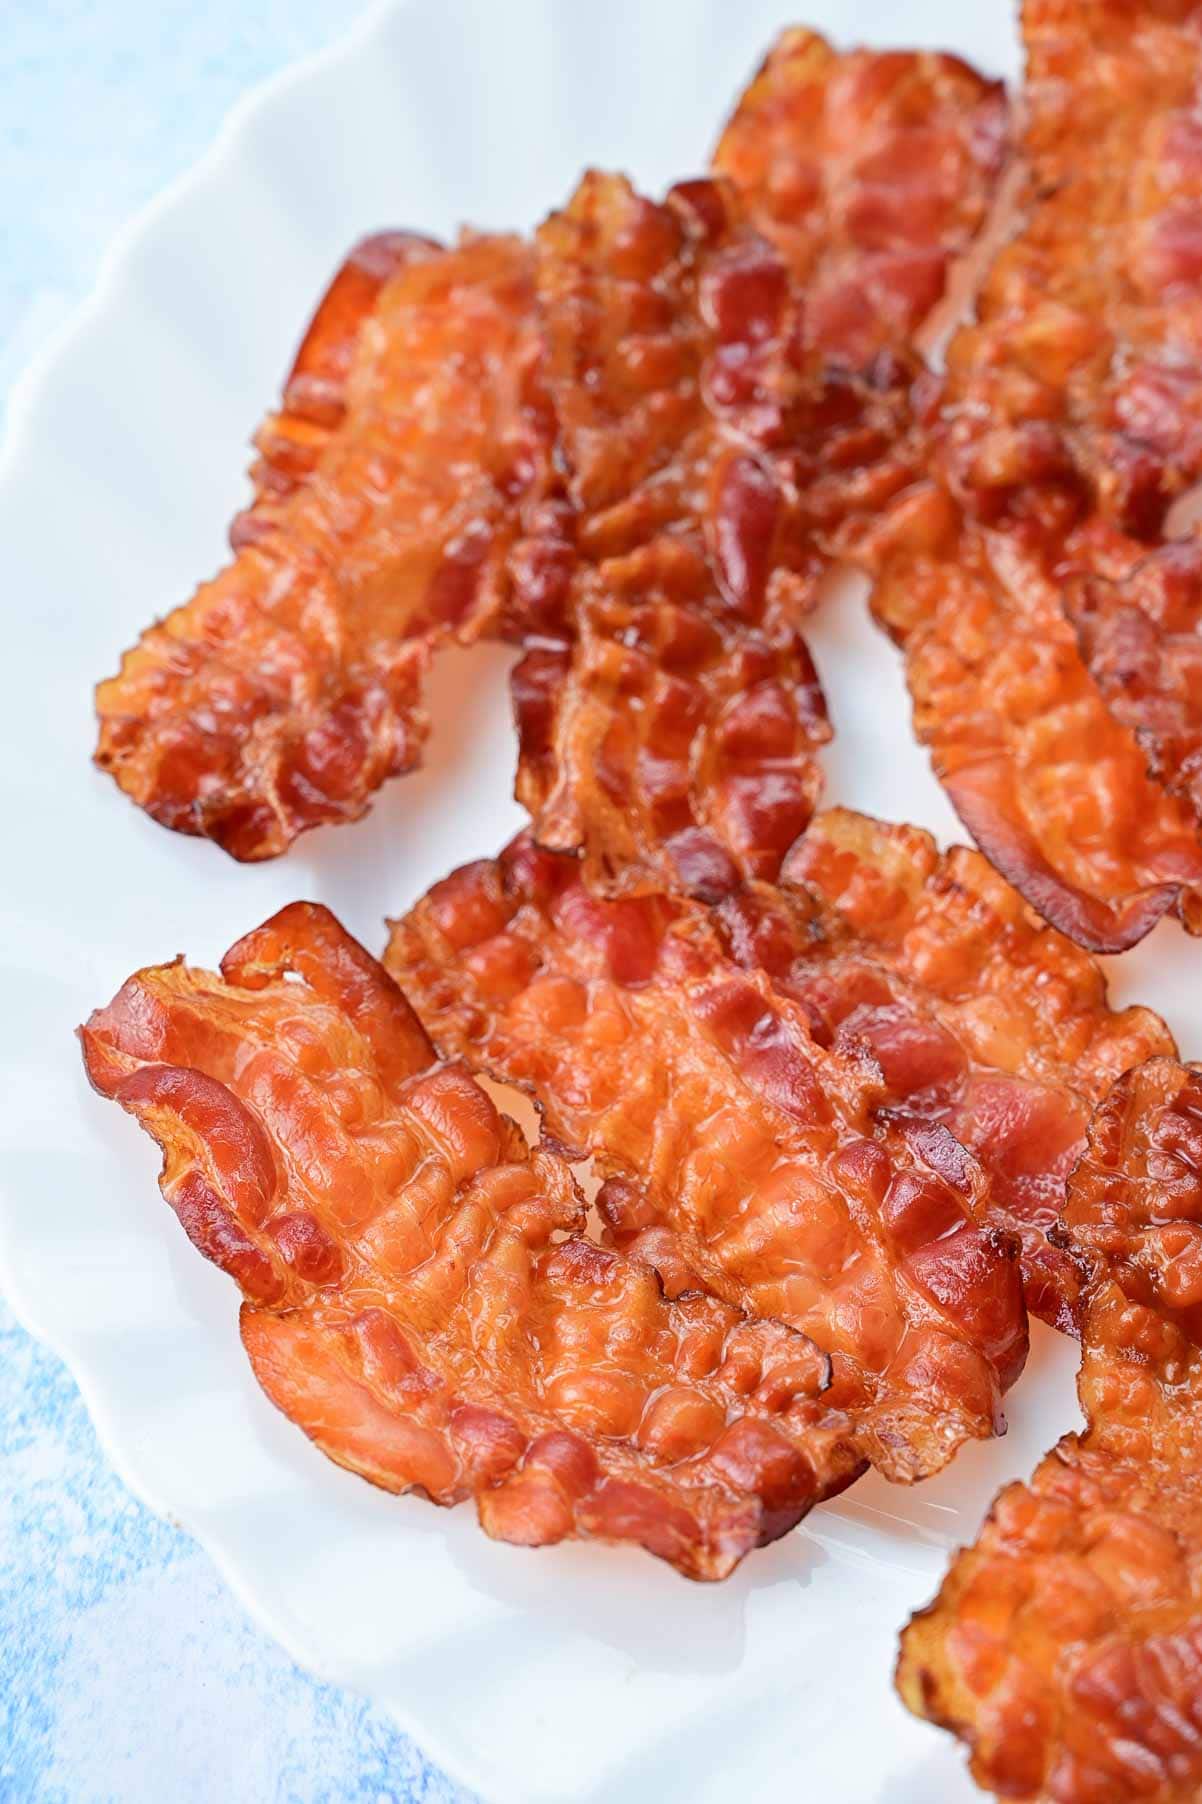 https://www.everyday-delicious.com/wp-content/uploads/2022/02/how-to-cook-bacon-in-the-oven-everyday-delicious-2.jpg